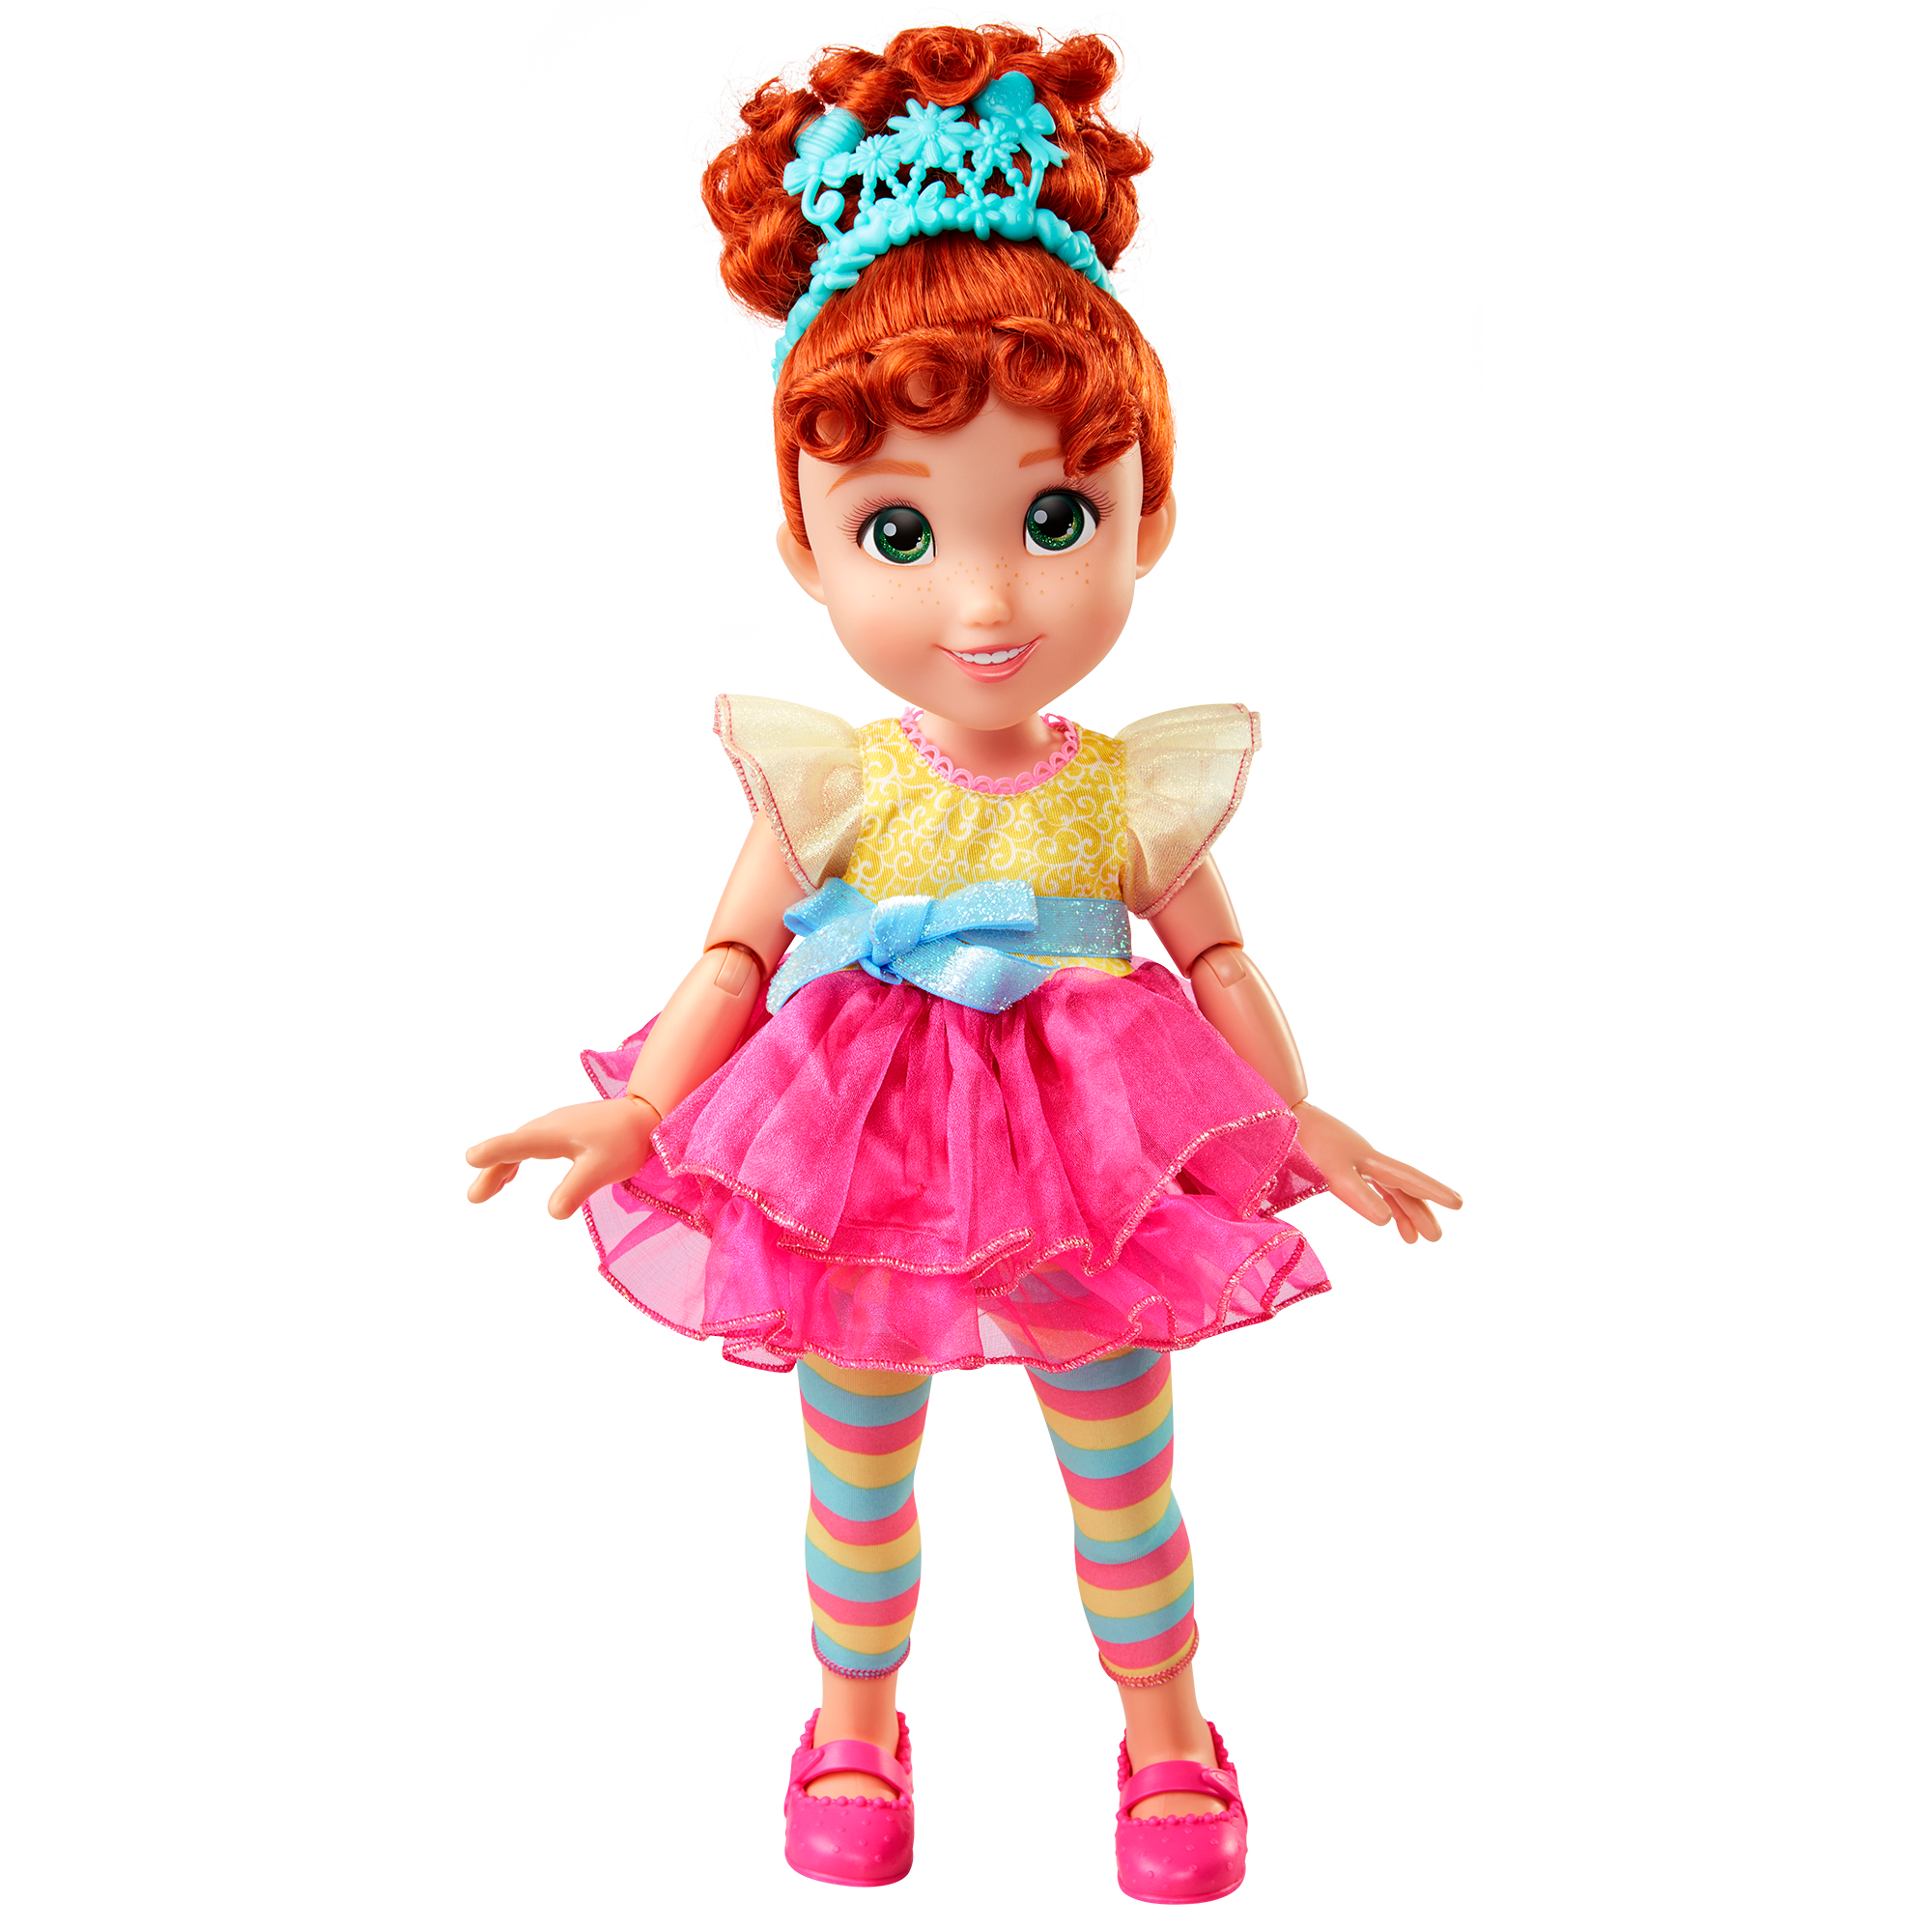 My friend fancy nancy 18" doll in signature outfit - image 1 of 3